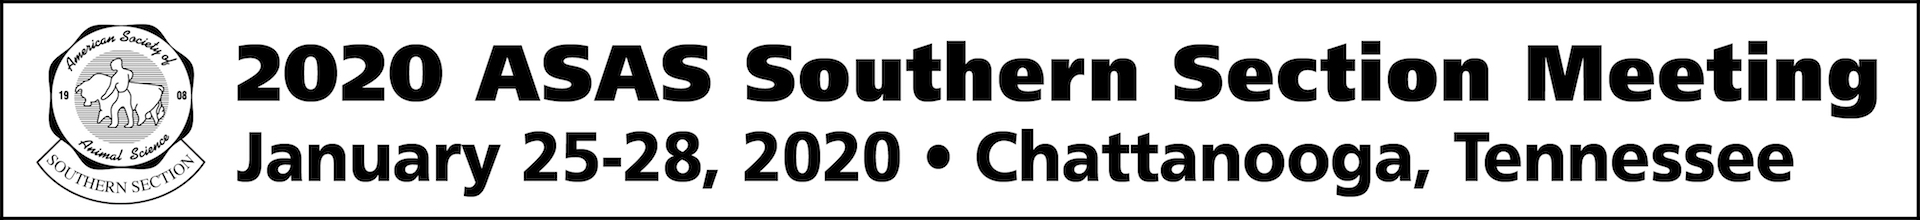 2020 Southern Section Meeting Event Banner